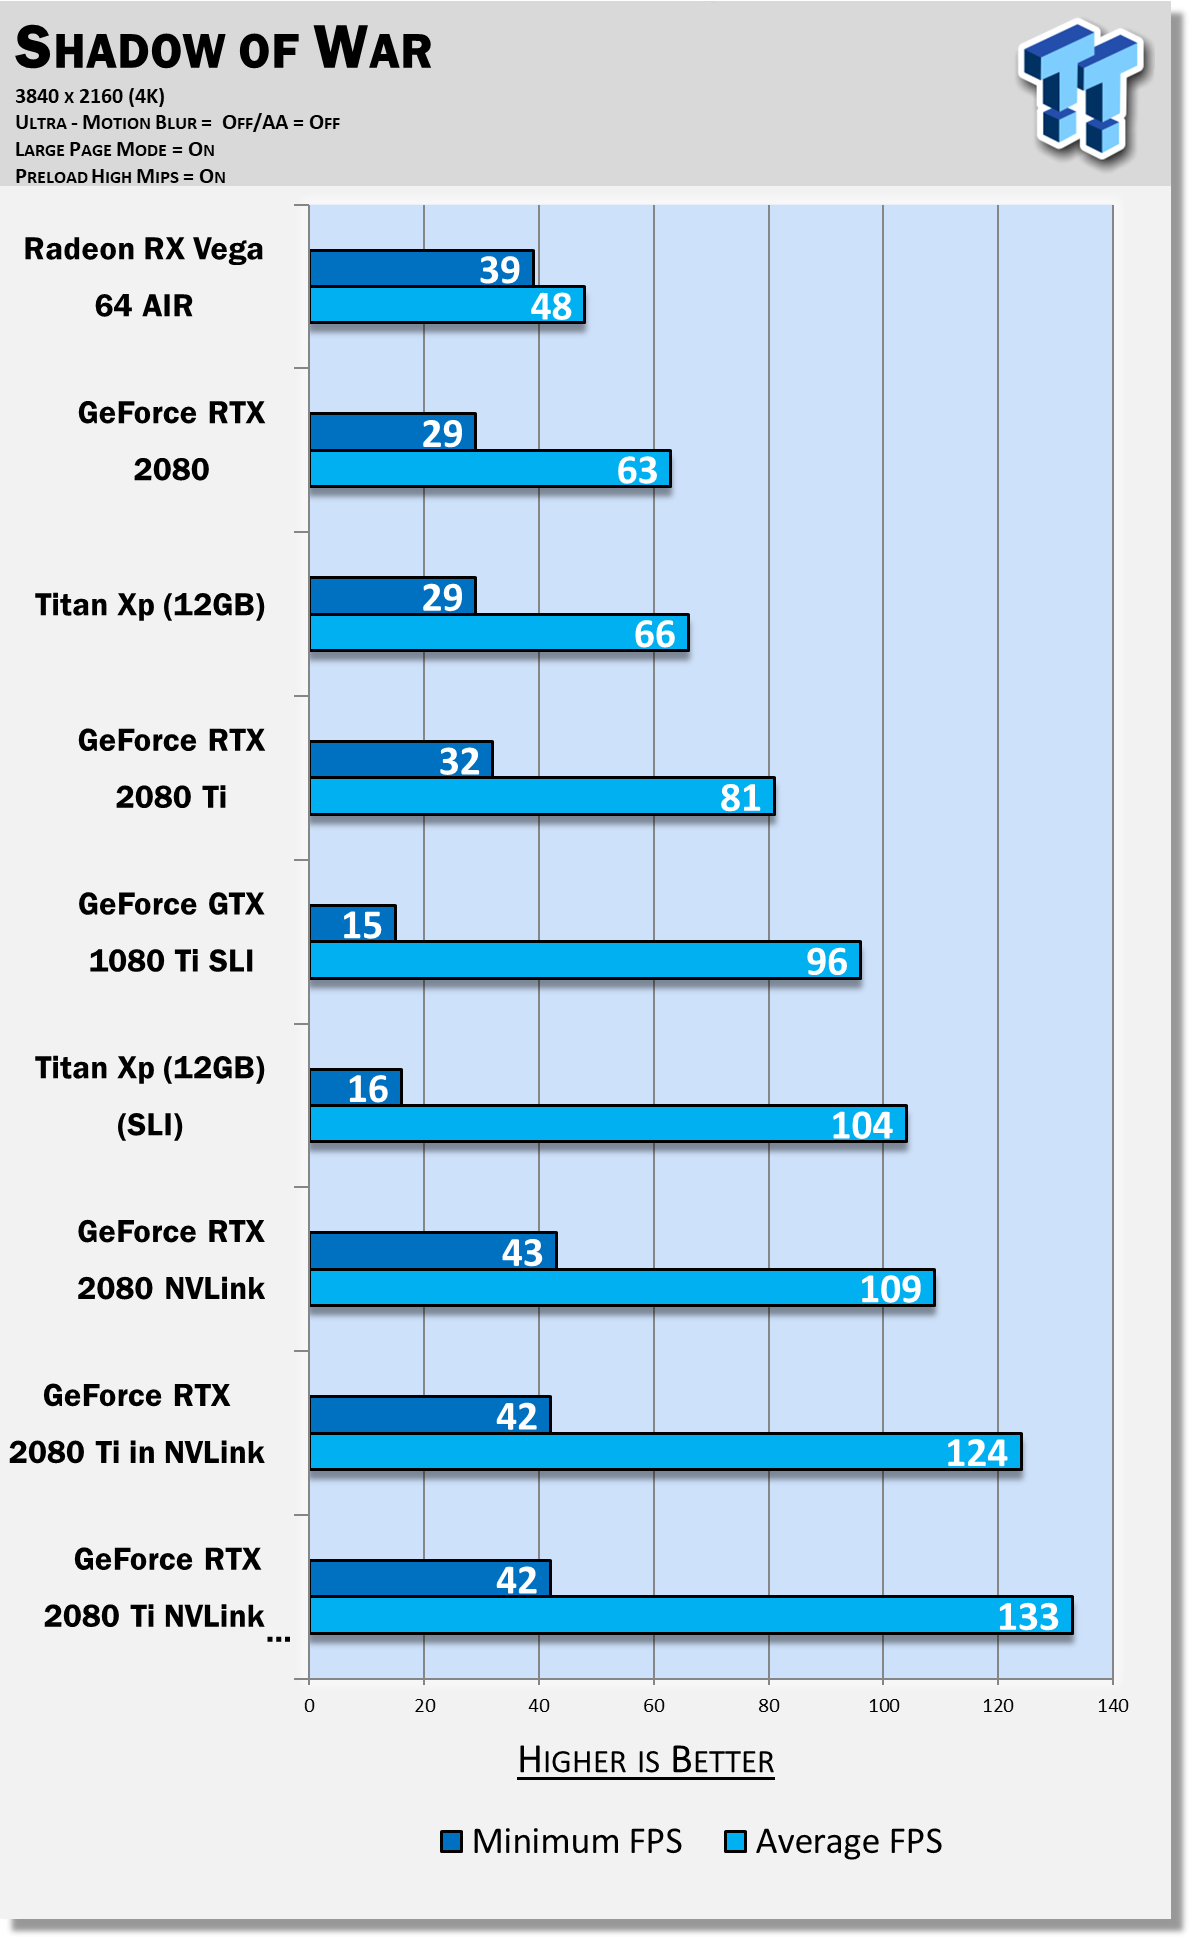 Nvidia releases first RTX 2080 4K benchmark results